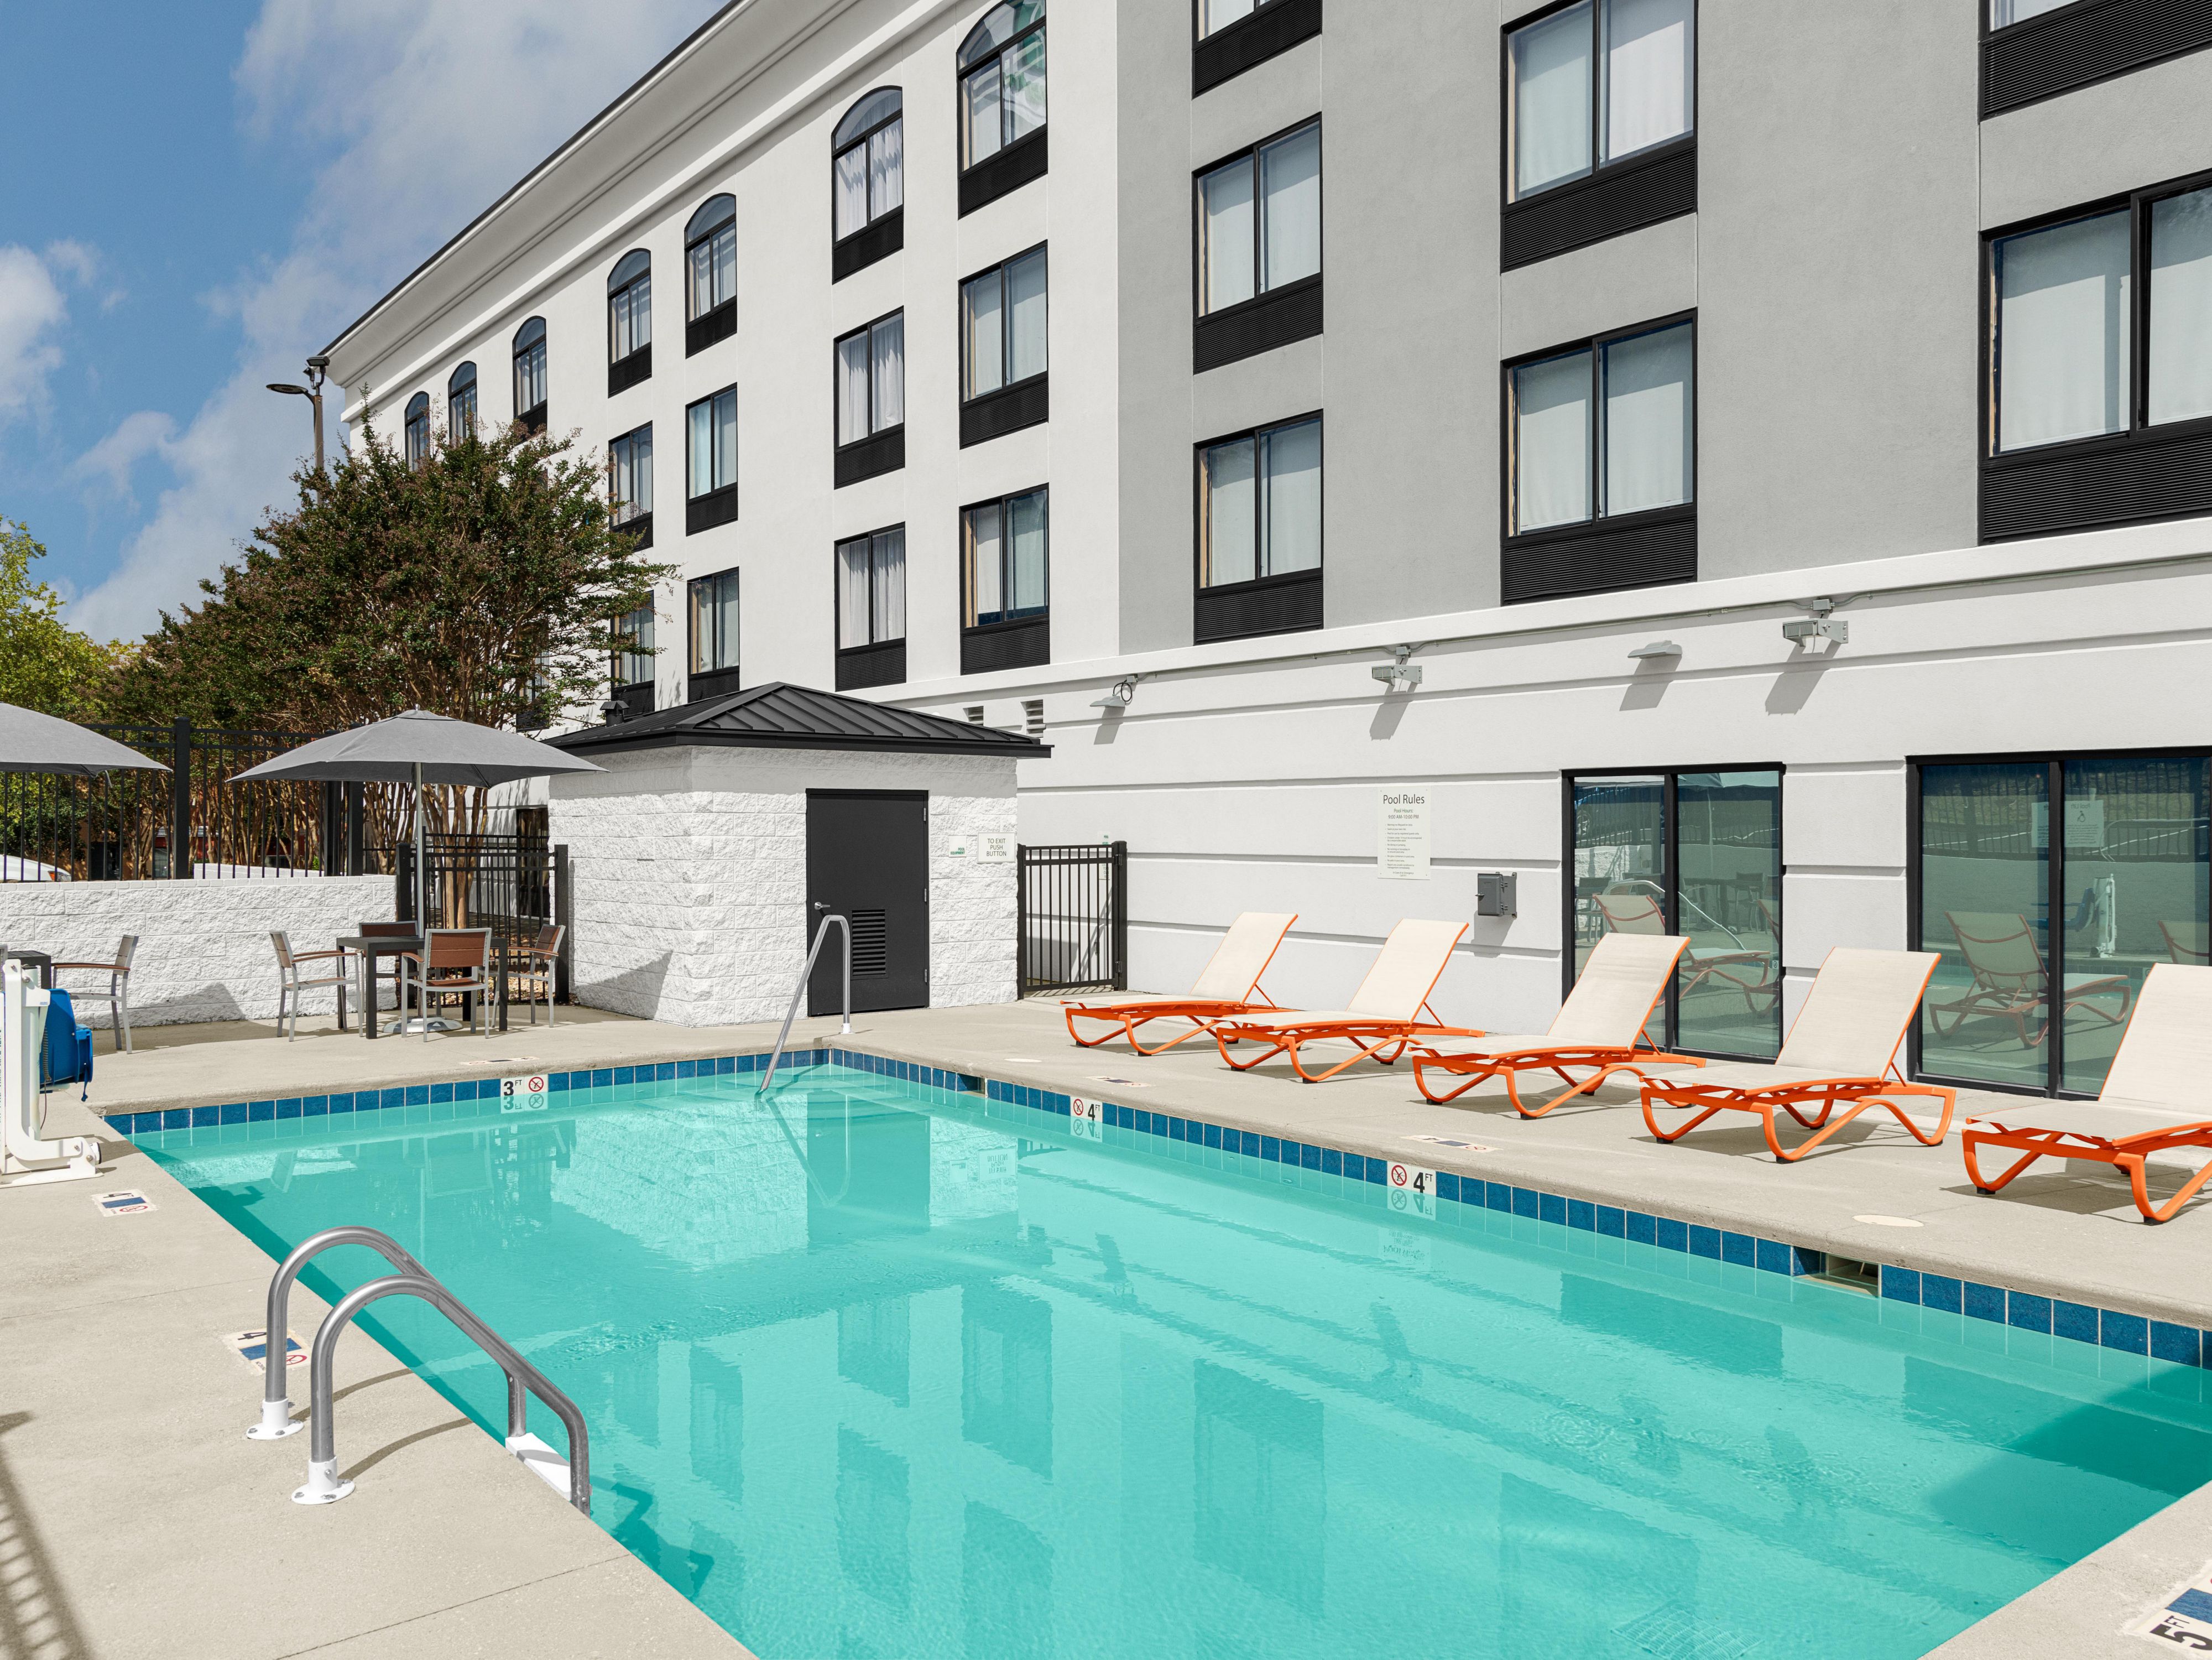 After a busy day of travel or out visiting Cleveland, return to our inviting outdoor pool!  Kick back and relax in a lounge chair overlooking the crystal blue water and take a dip to refresh.  